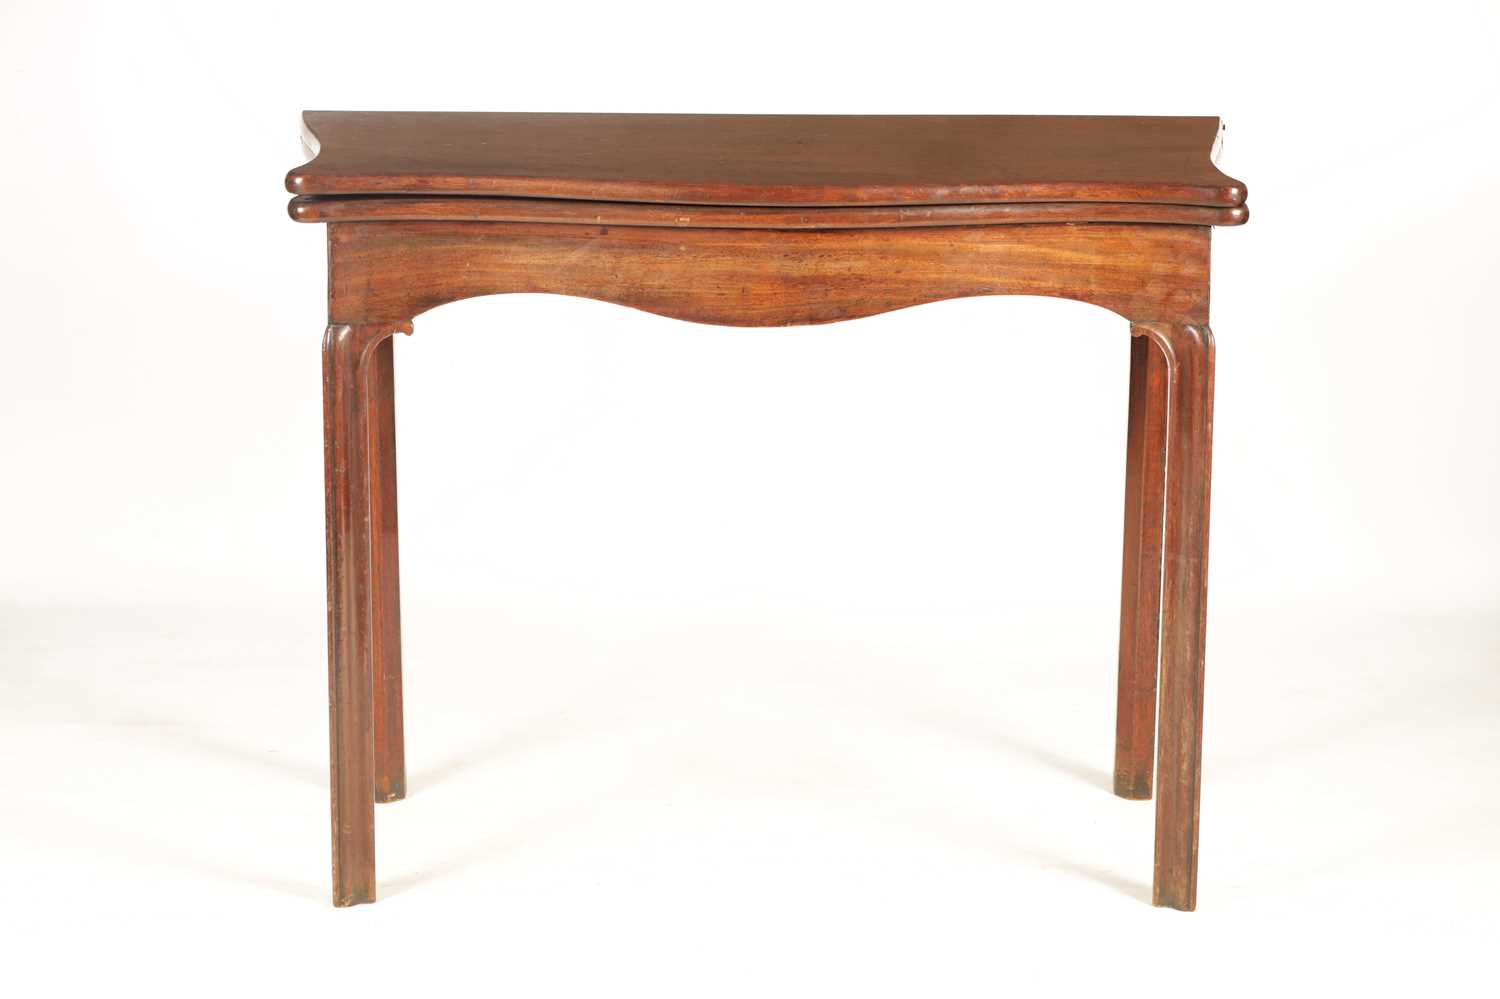 A GEORGE III MAHOGANY CHIPPENDALE STYLE SERPENTINE TEA TABLE - Image 5 of 8